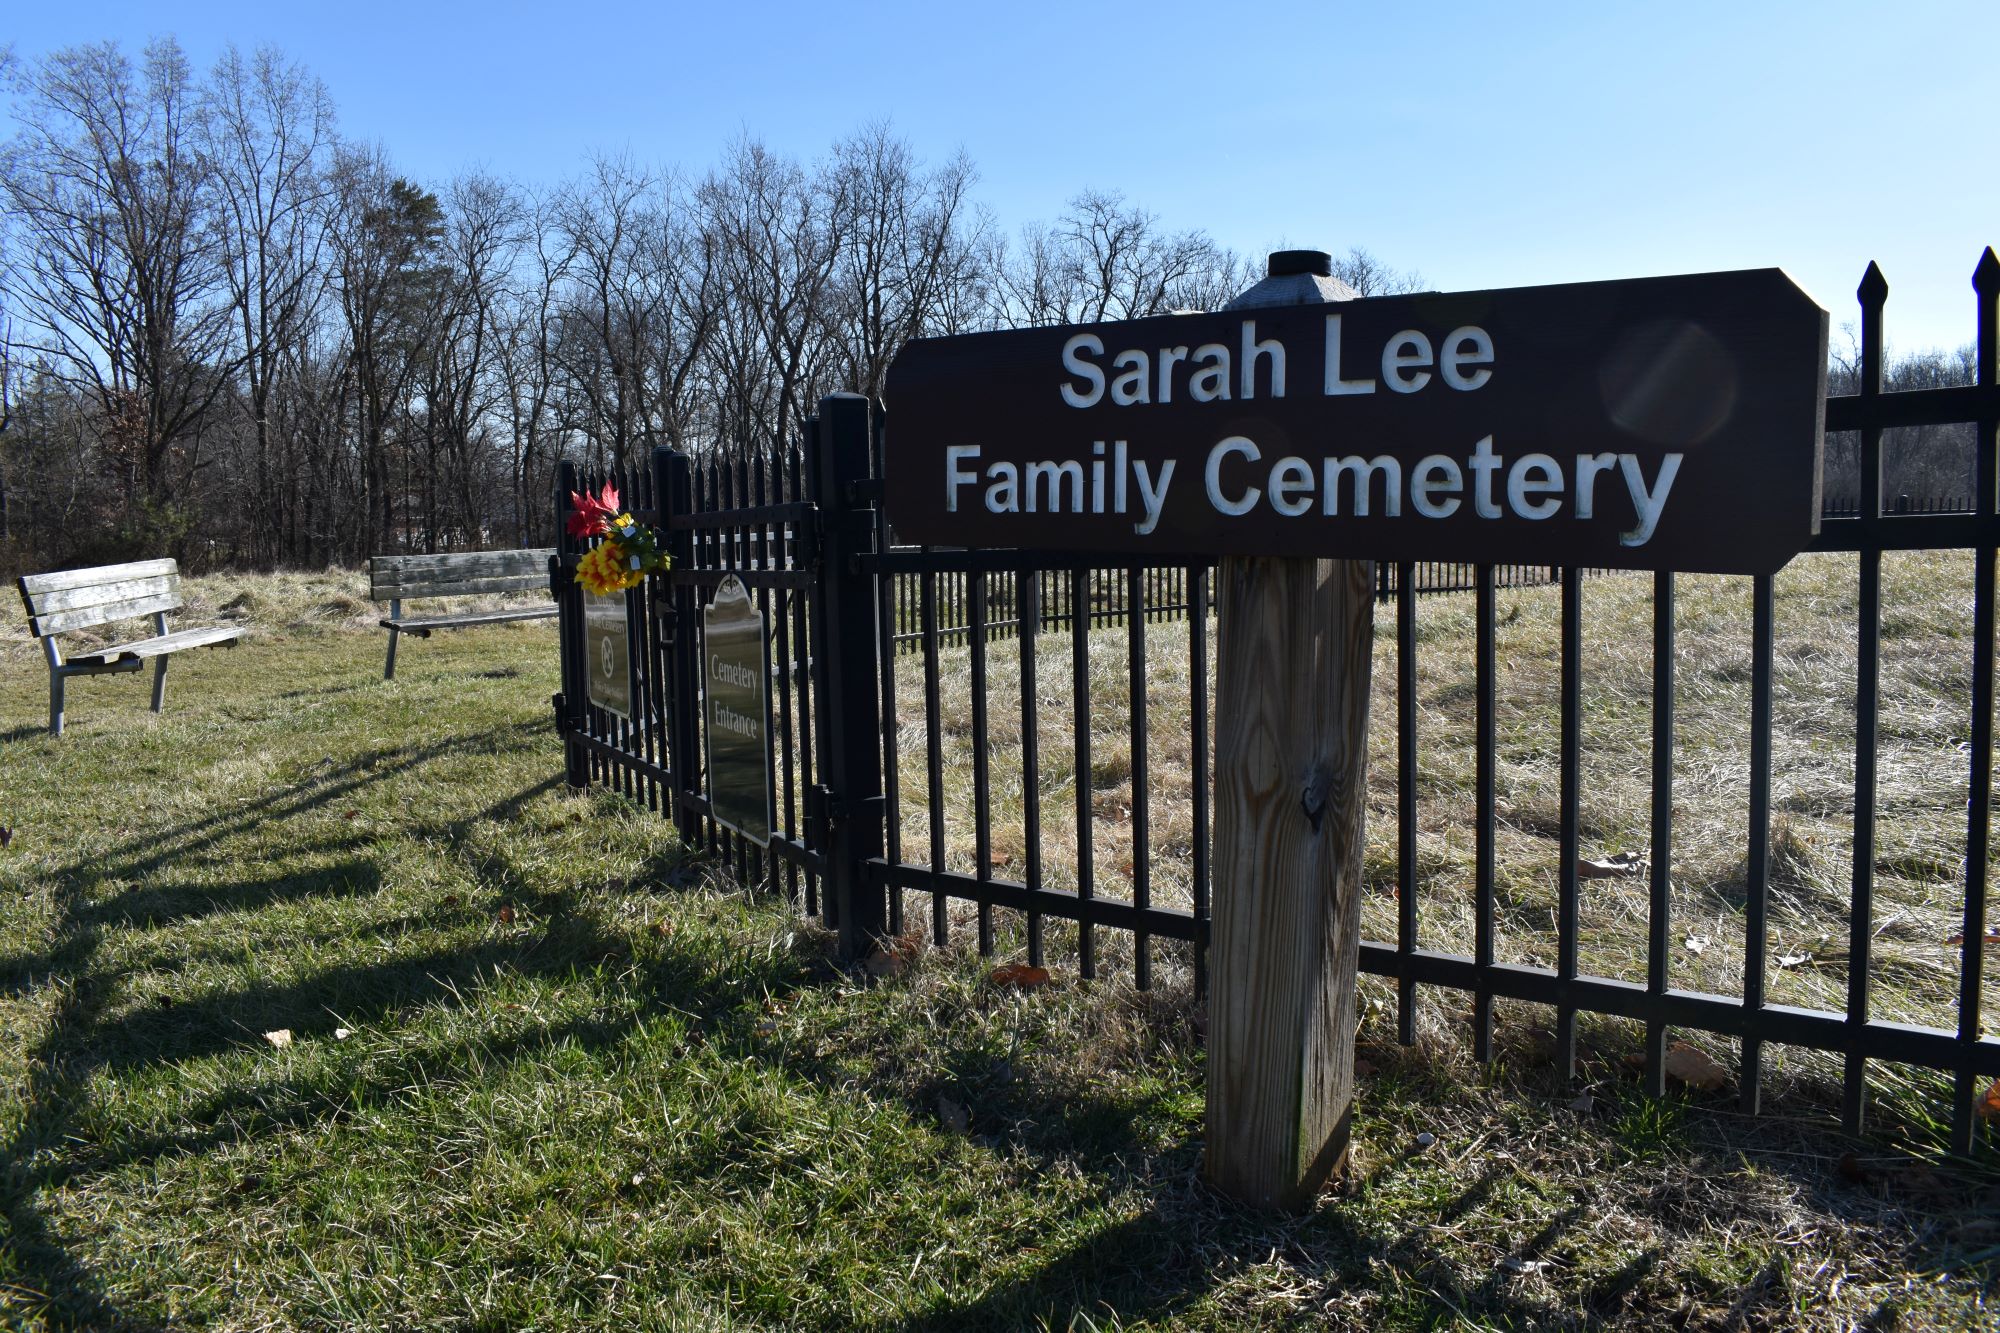 A wooden sign reads "Sarah Lee Family Cemetery" posted outside of a metal fence surrounding a grassy area. Two benches and a stand of trees are in the background.